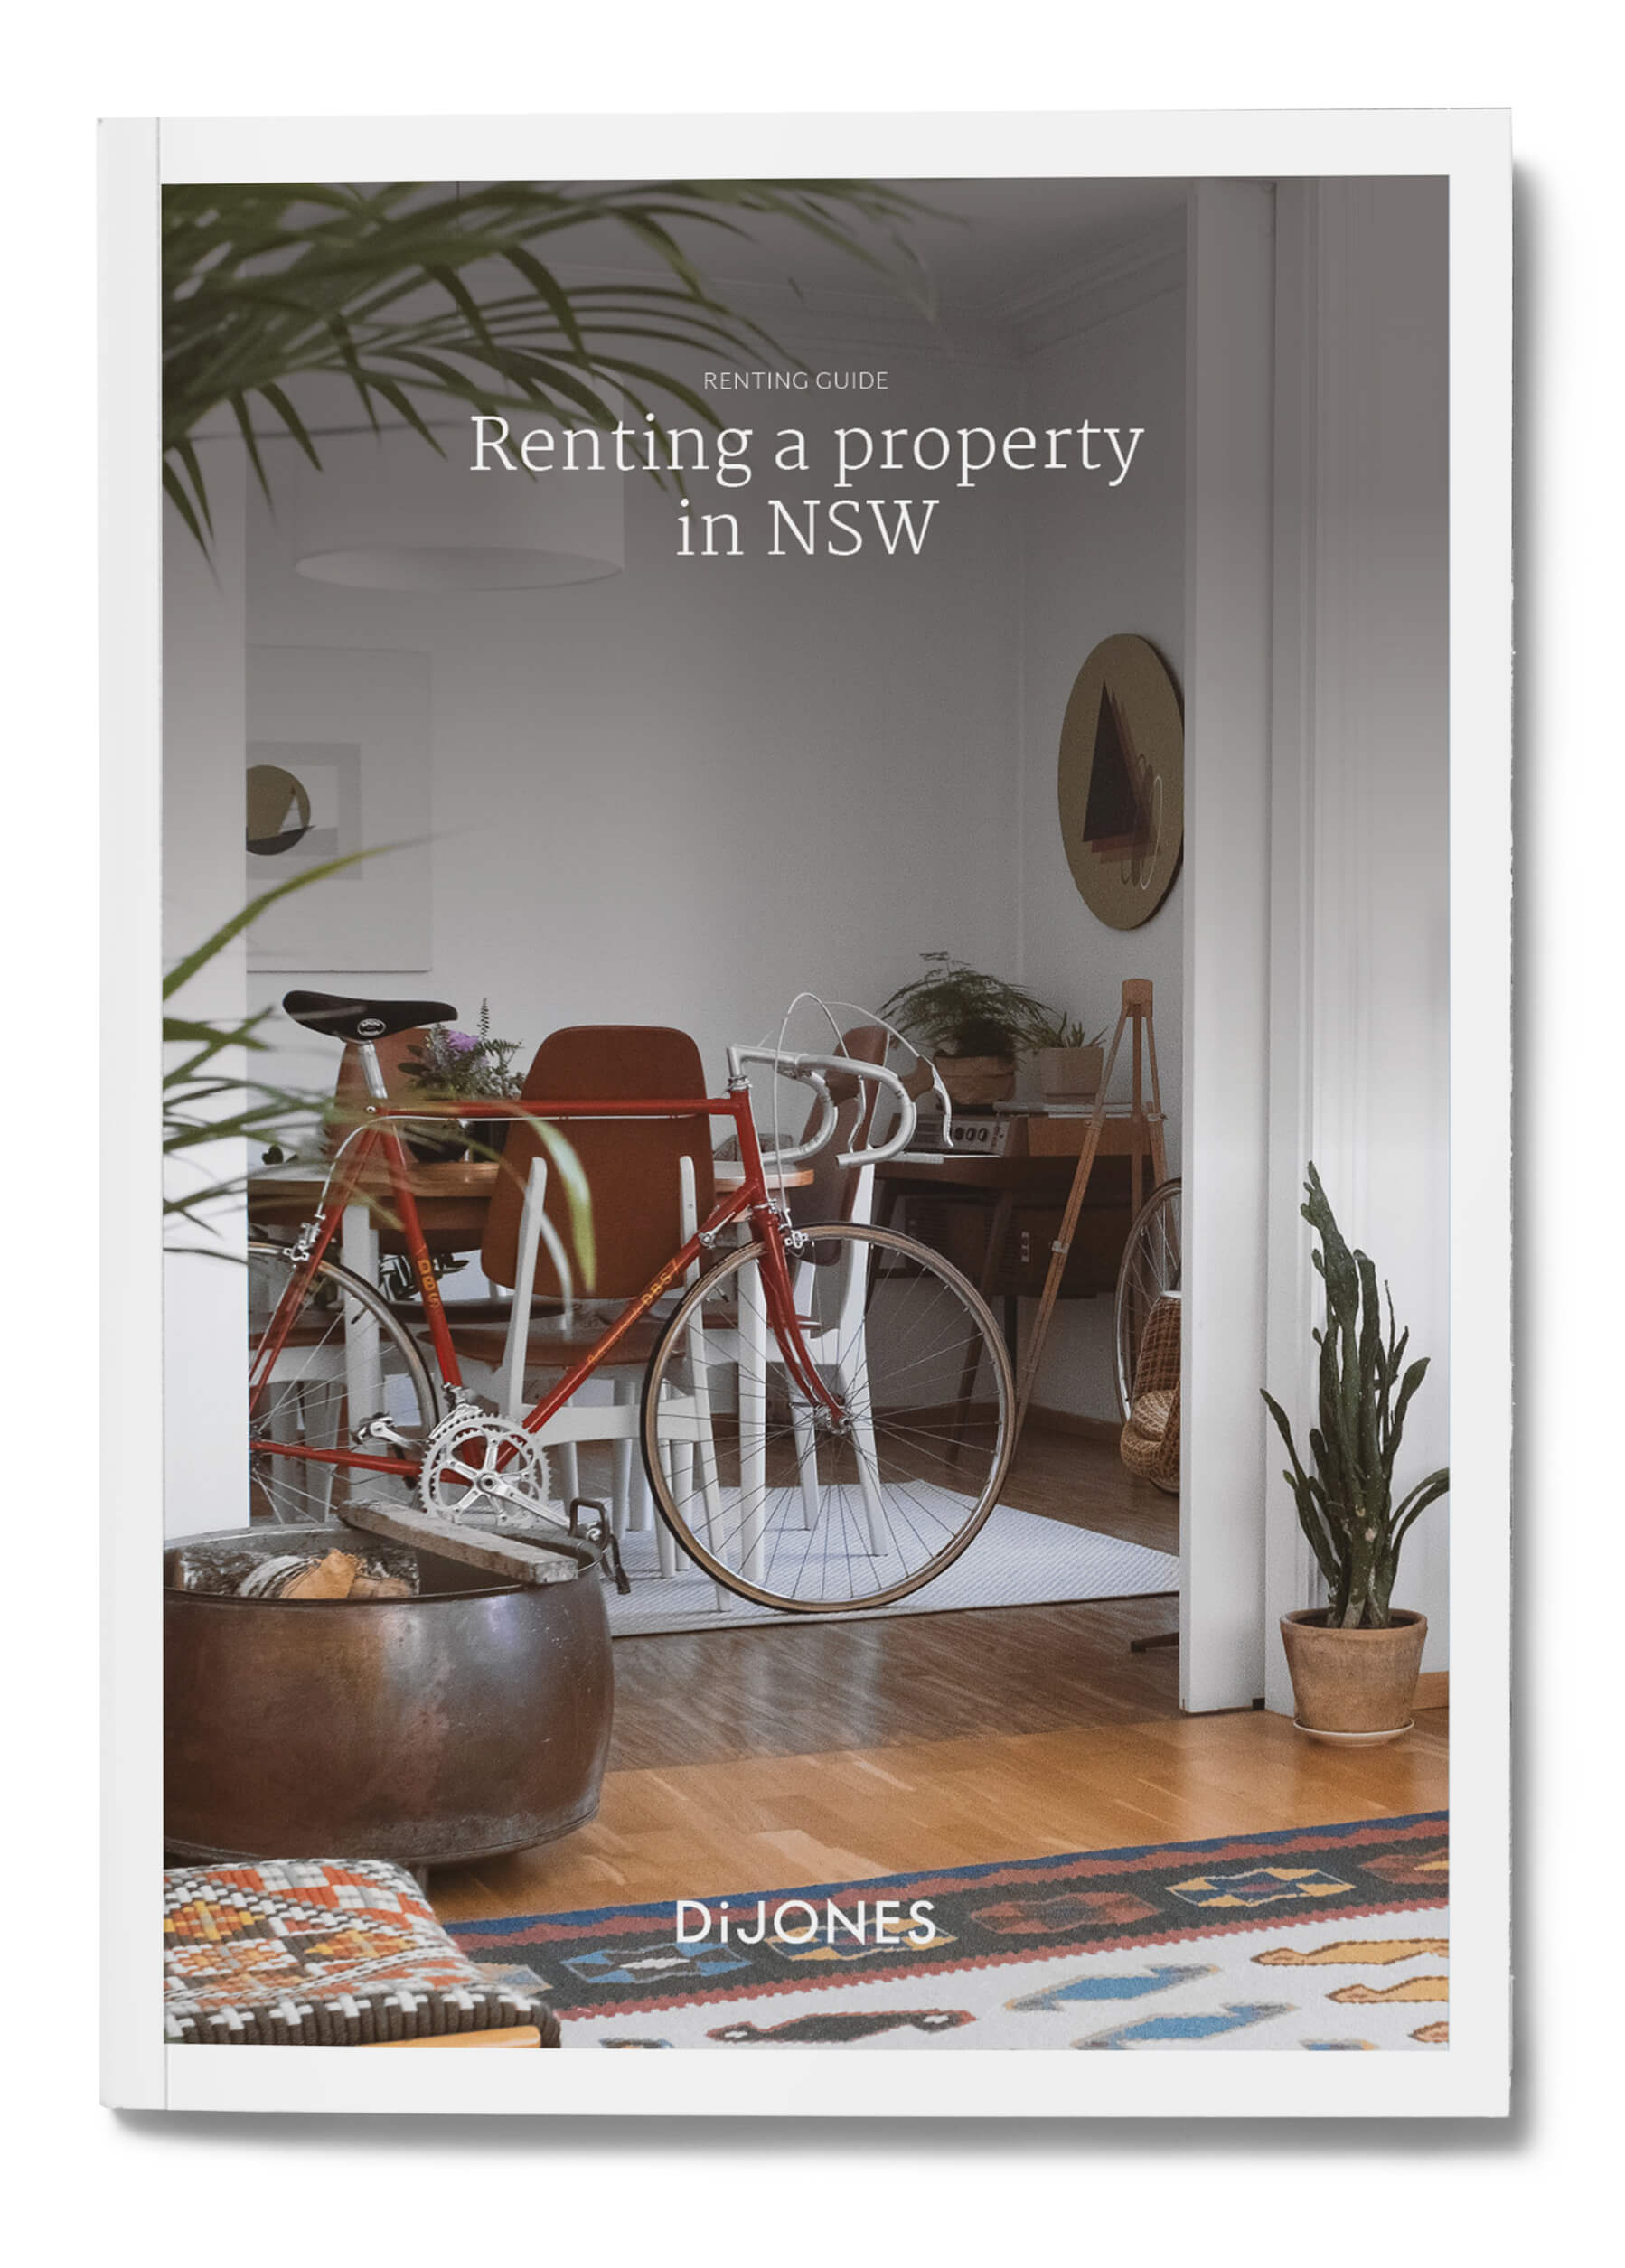 Renting a property in NSW eBook cover DiJones real estate